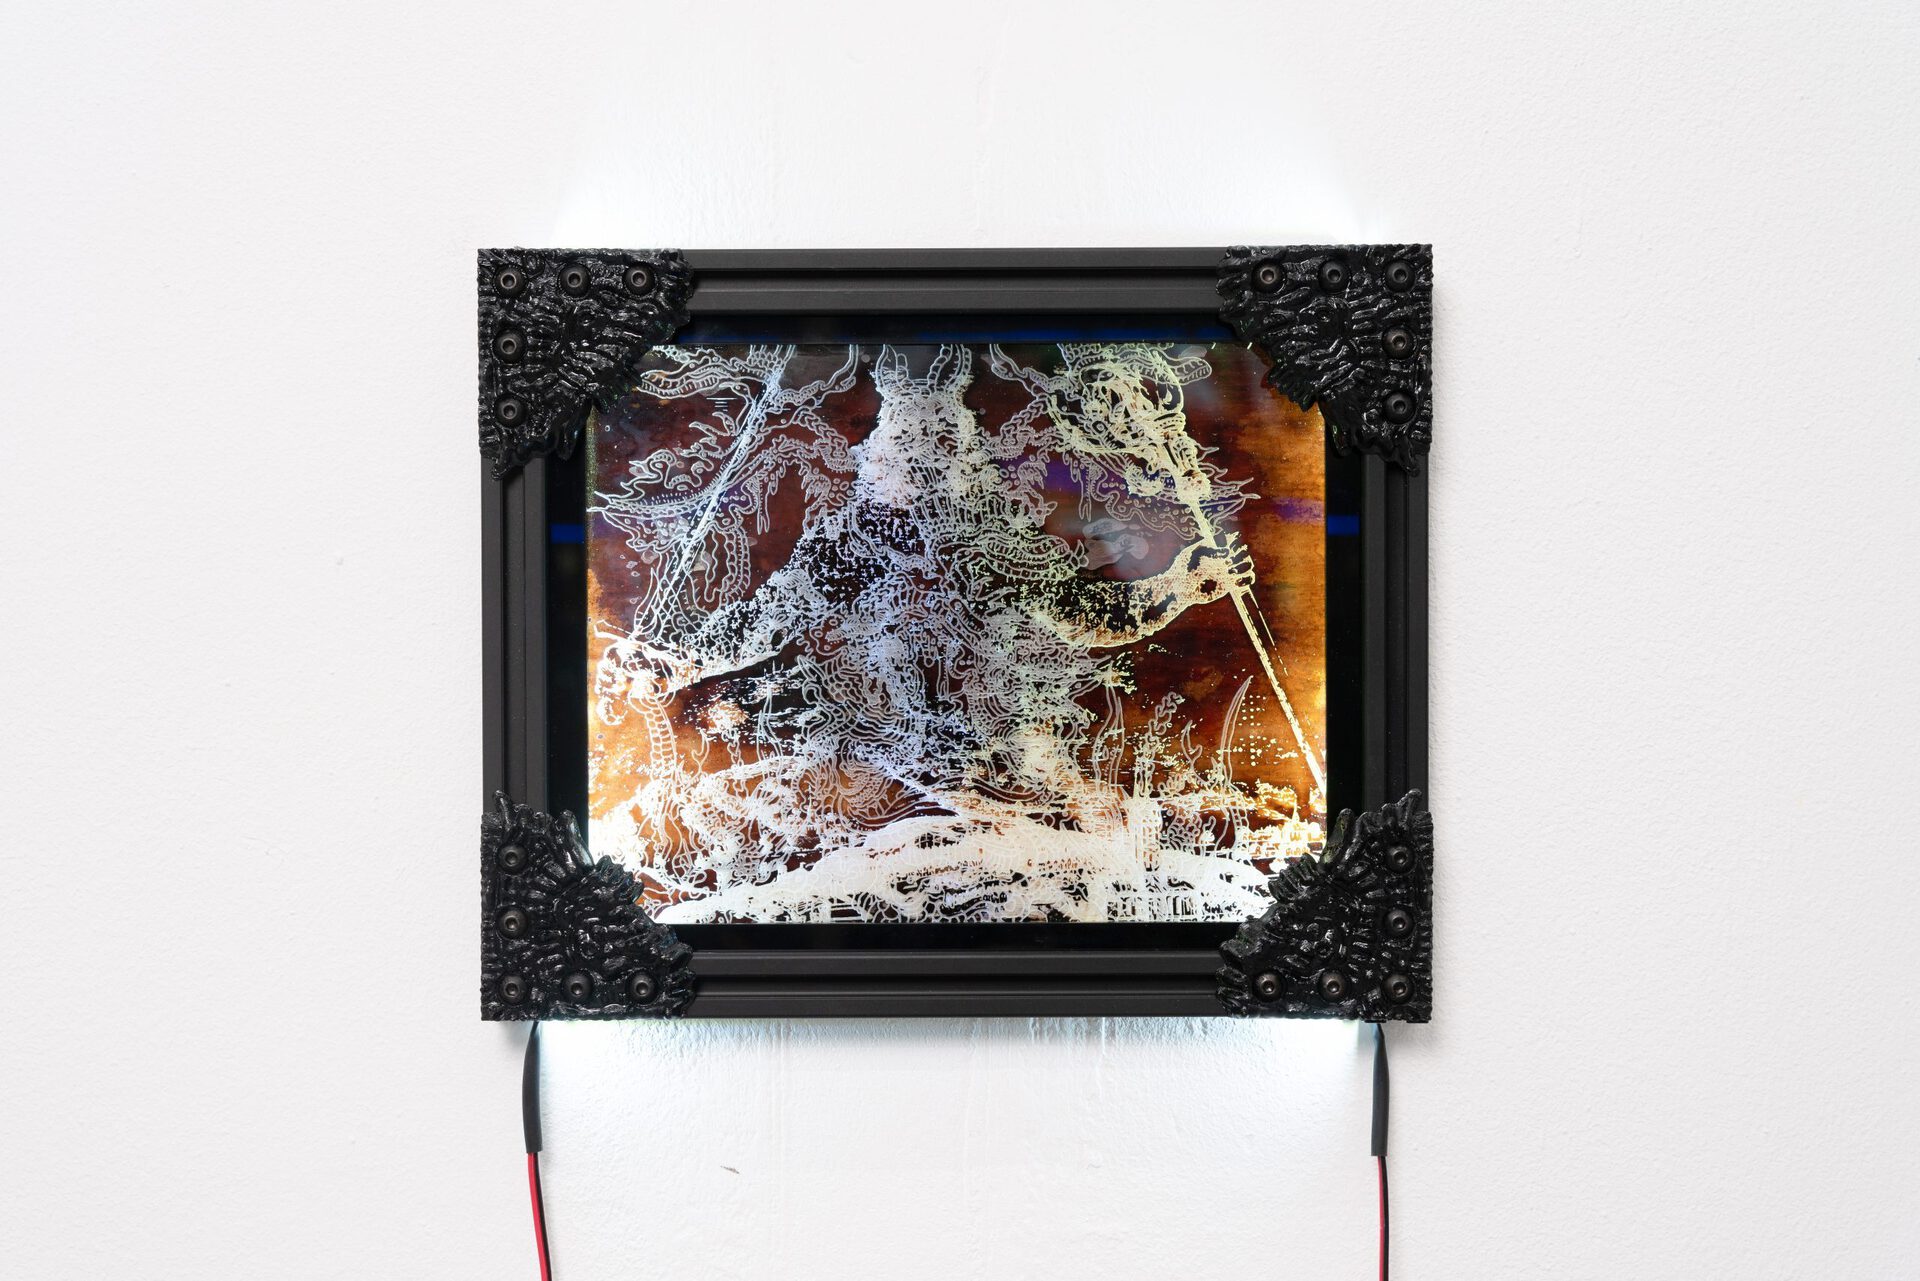 Andrew Rutherdale, The Leviathan’s Corpse, 2021, Laser-engraved SCOBY on acrylic panel, ABS, epoxy resin, aluminum framing, LEDs